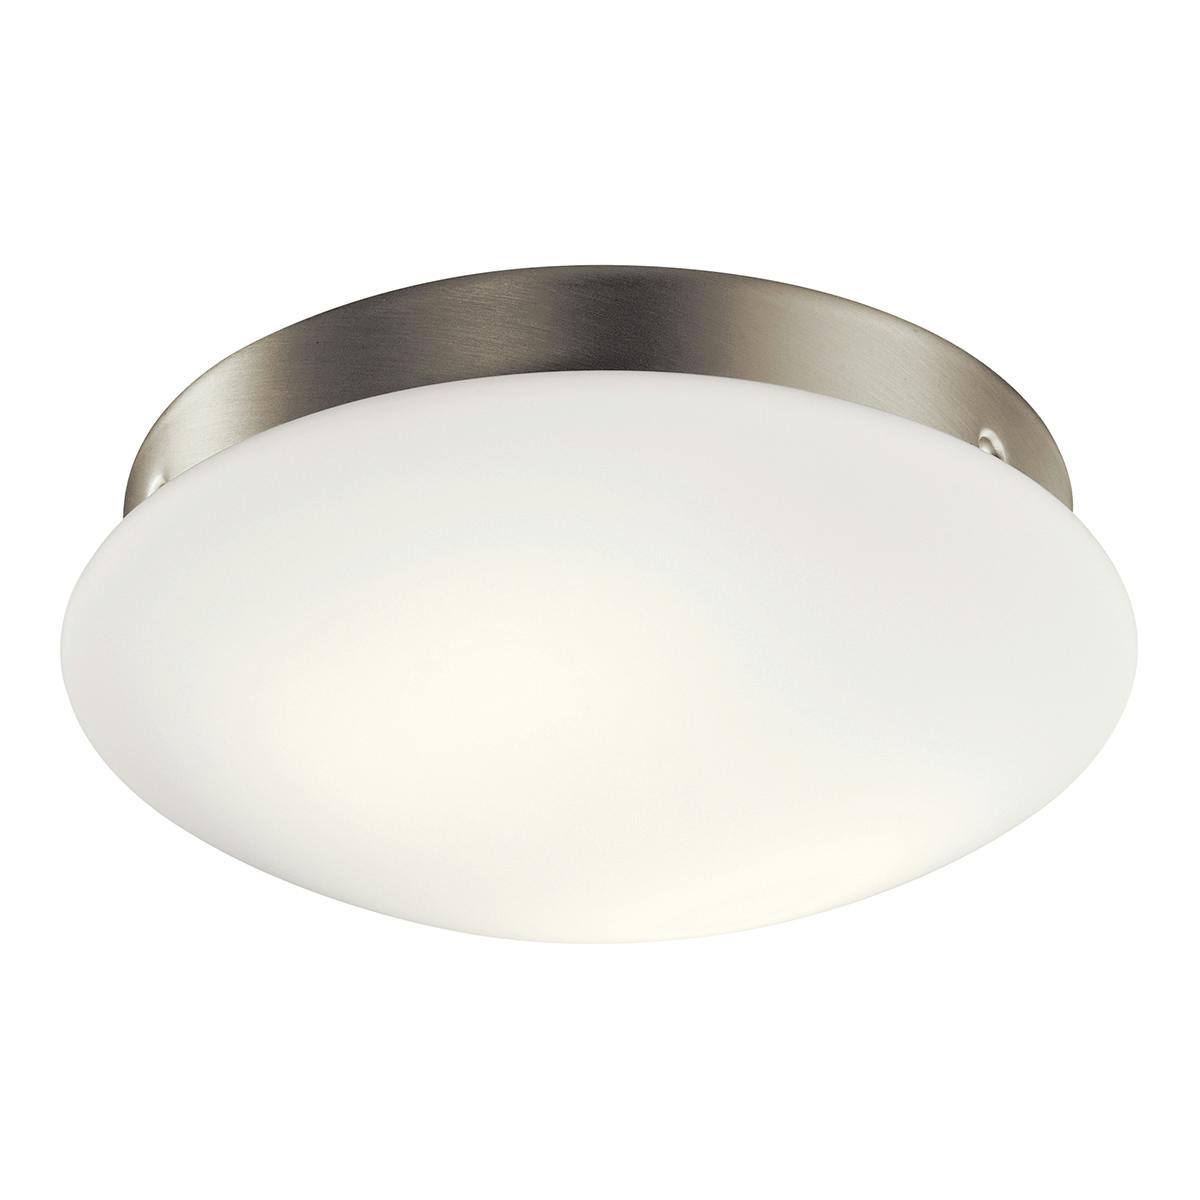 Ried™ LED Fan Light Kit Brushed Nickel on a white background